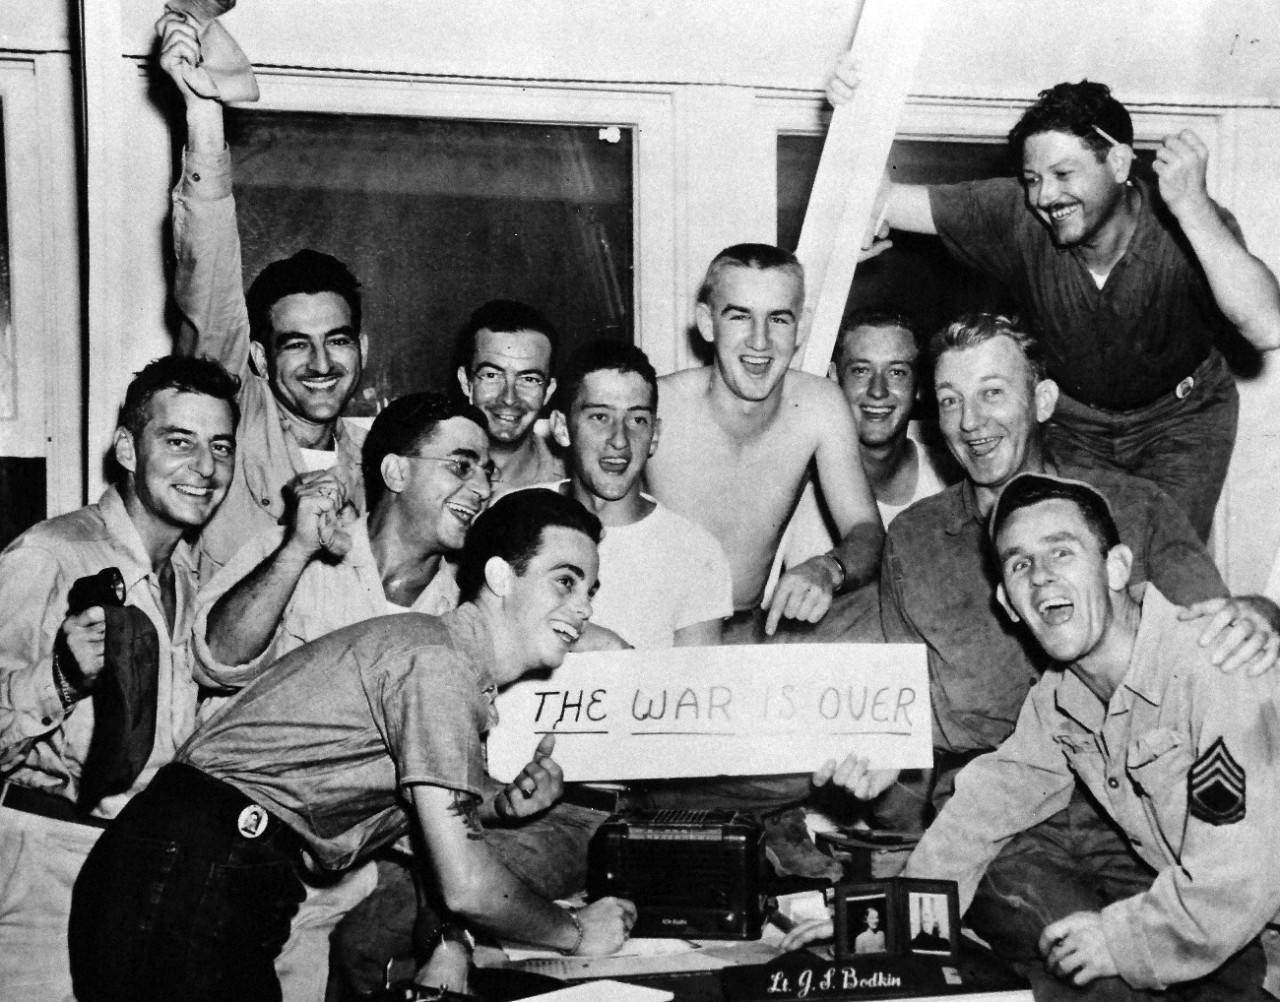 80-G-490285:  V-J Day, August 15, 1945.      Victory Celebrations (VJ Day) at CINCPAC HQ, Guam, August 15, 1945.  Shown:  T/5 Carl Gurtcheff, AUS; CPL. Vic Colucci; PHOM2/C Arthur Ryding, USN; PHOM2 Clifford Martin; PHOM2 William Reigger; PHOM2/C James Badgett; PHOM2/C J.F. Whitely; SP(P)2/C Dan Brown; PHOM1/C Clayton Aylor; and TSGT Denny O’Neill.   Official U.S. Navy photograph, now in the collections of the National Archives.   (2015/11/10).